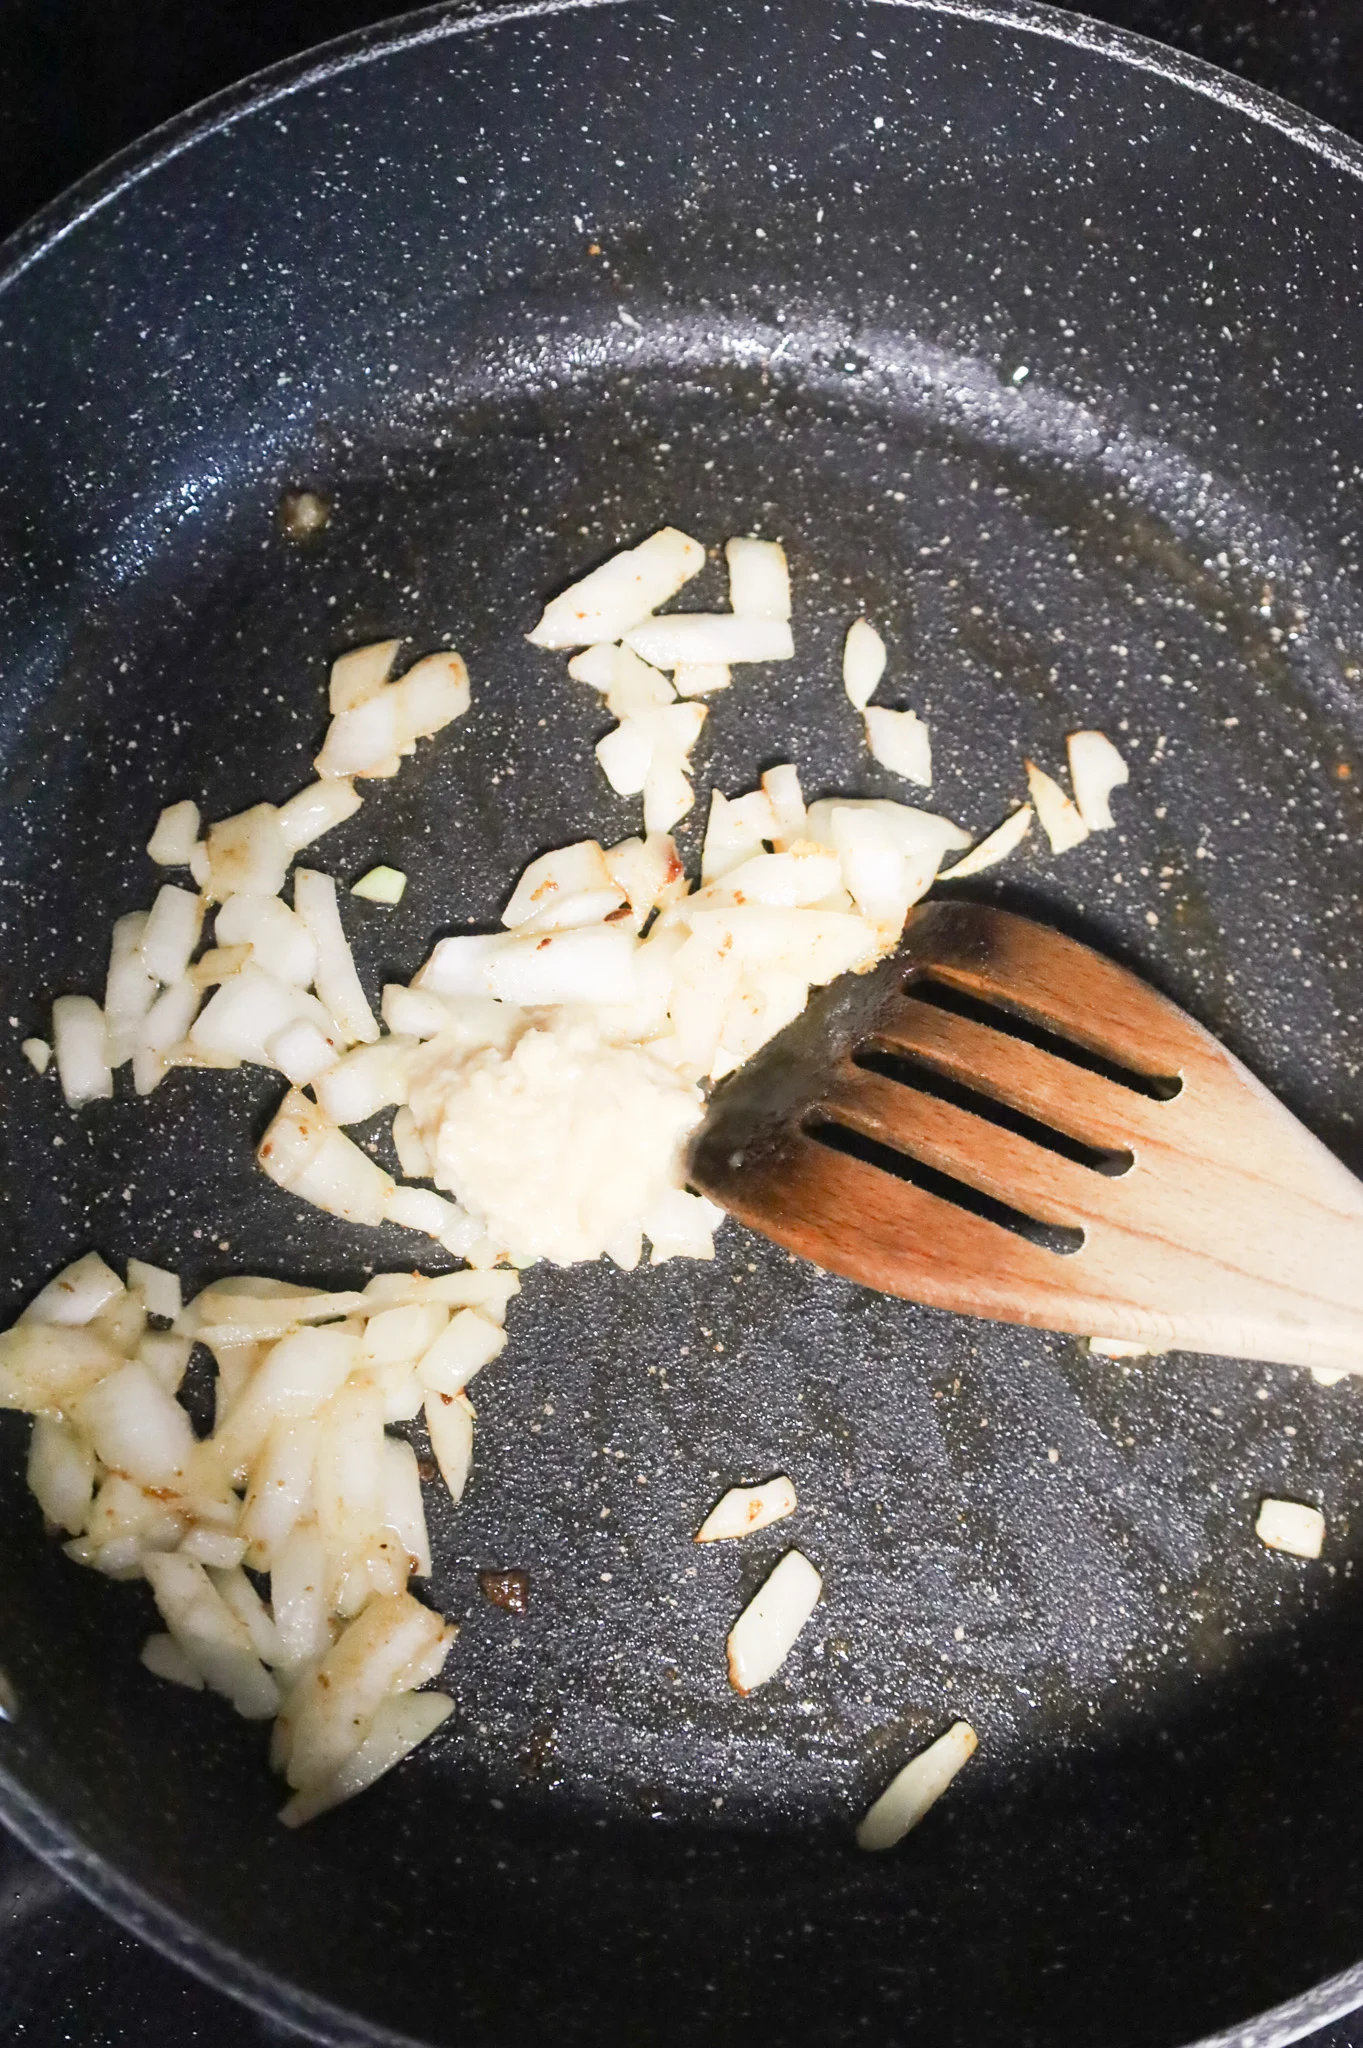 diced onions and garlic puree in a skillet